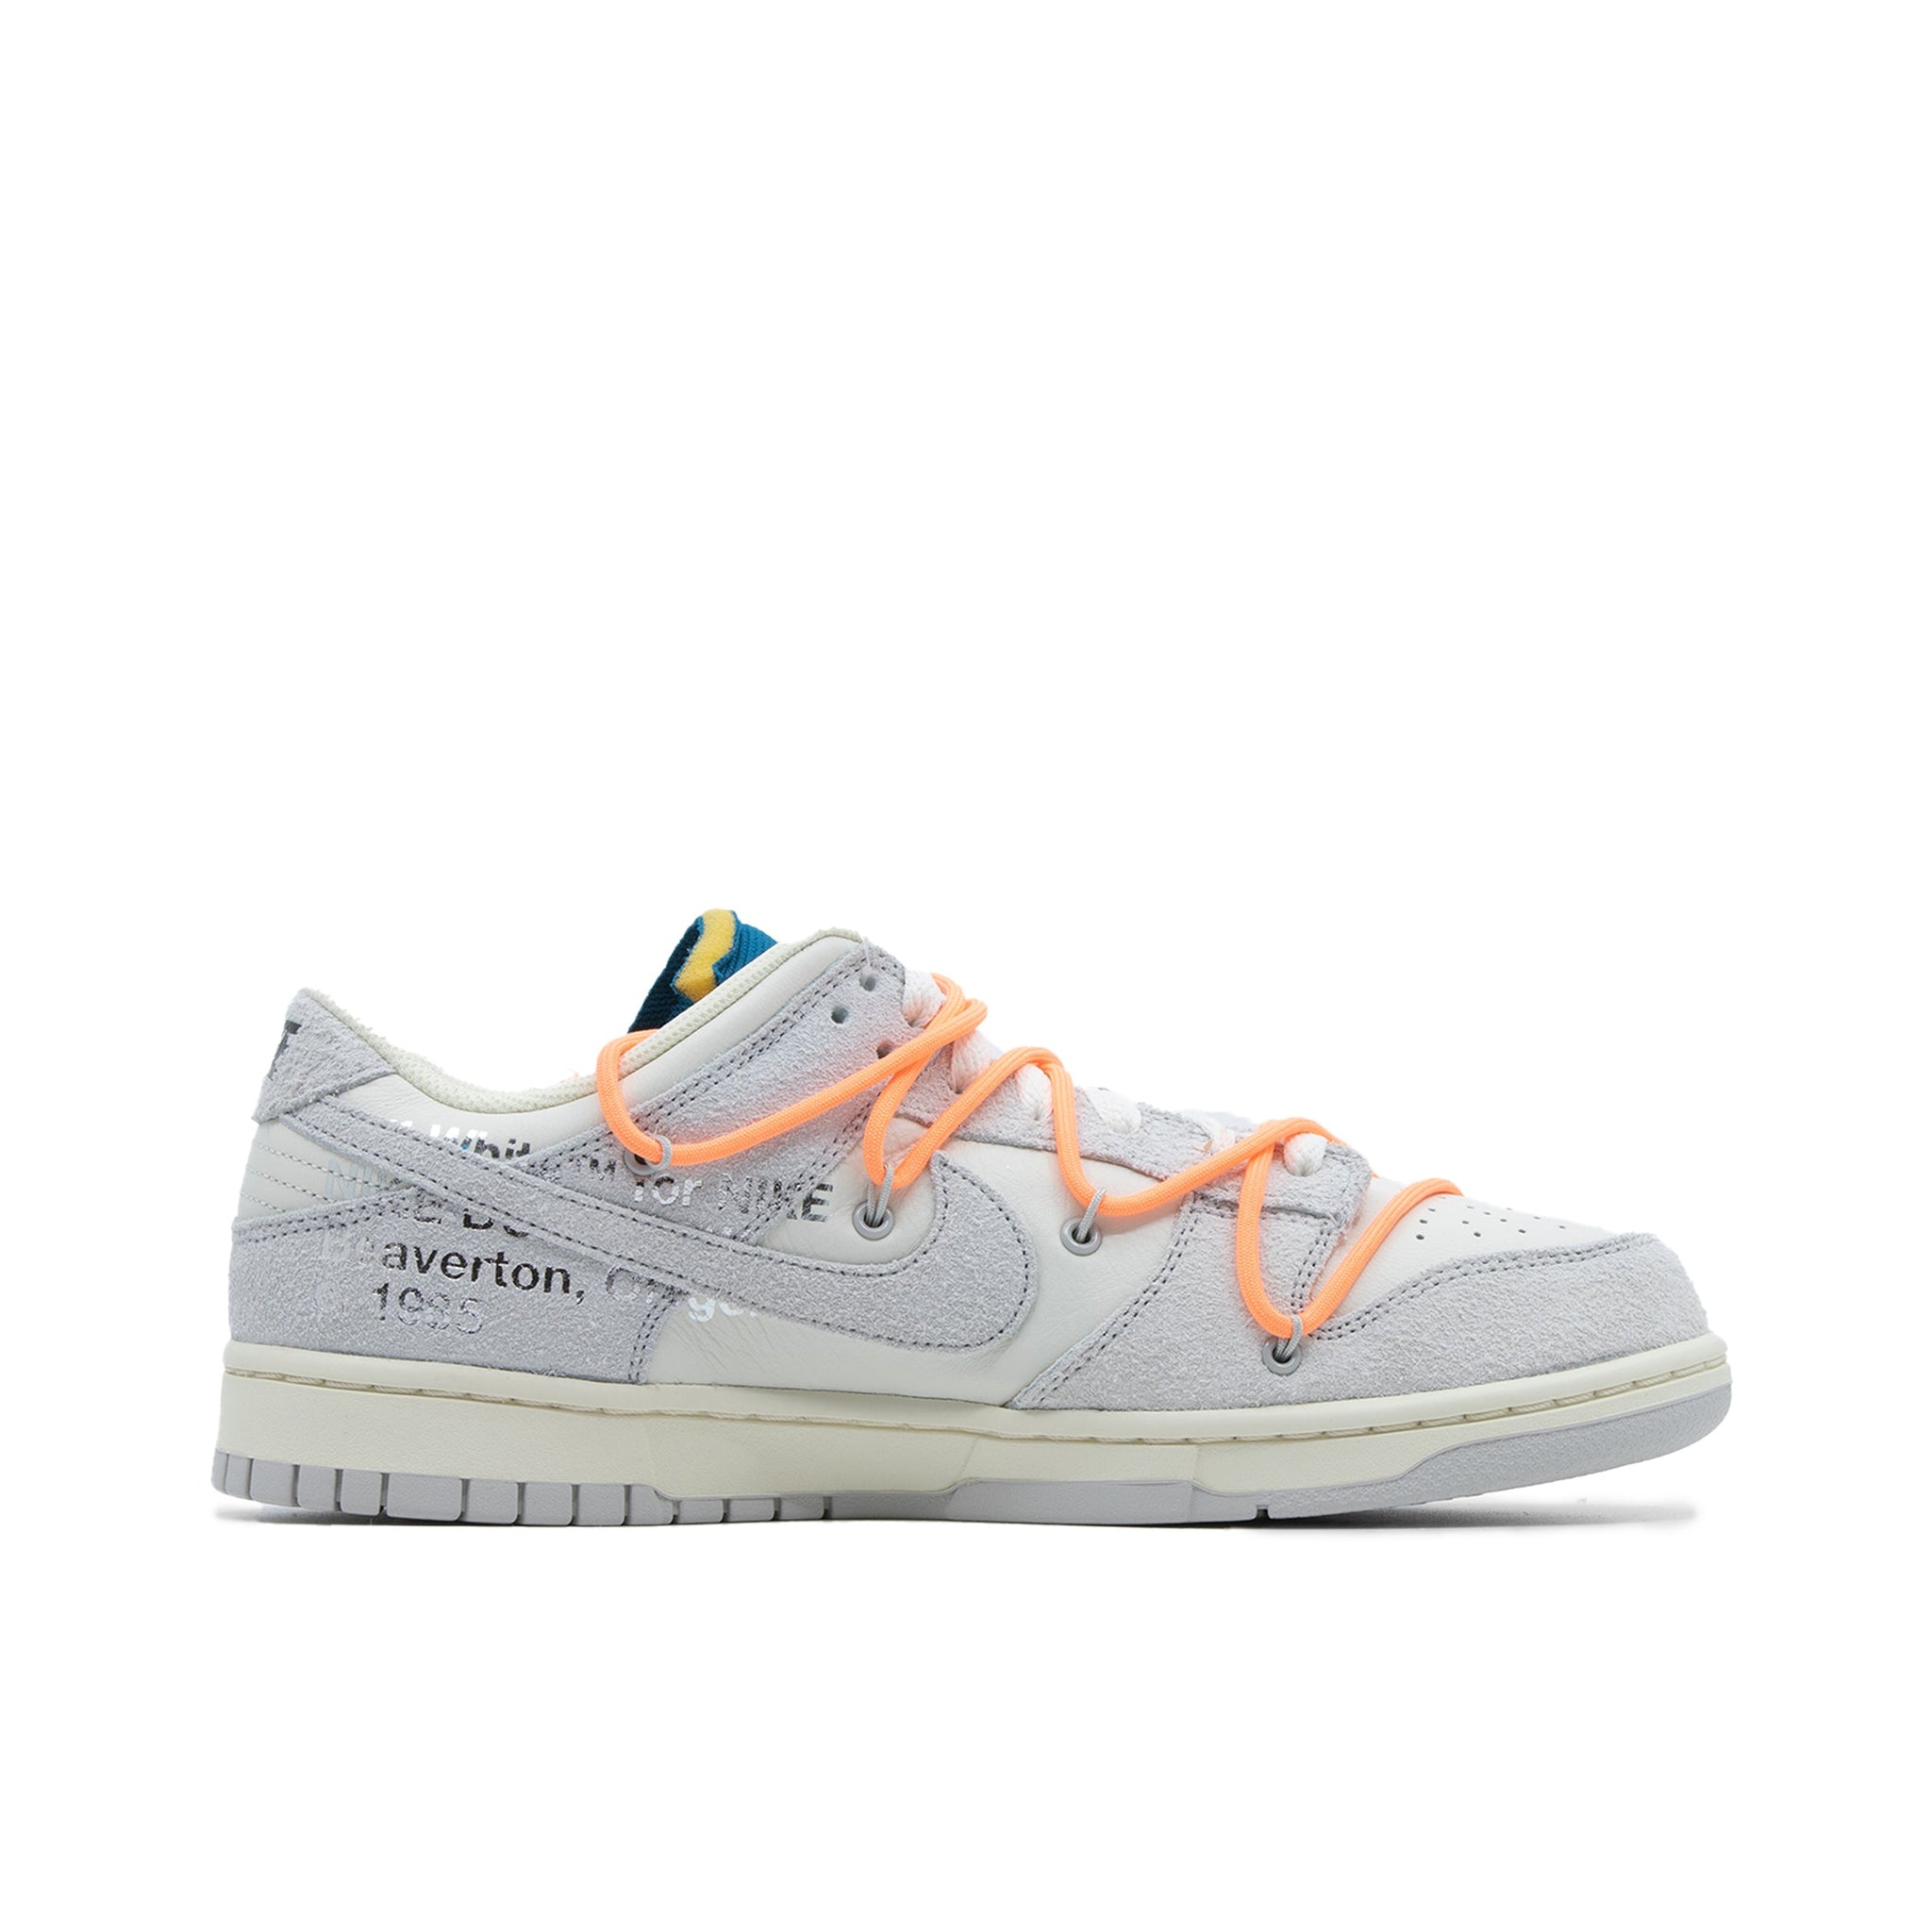 NIKE DUNK LOW OFF-WHITE LOT 19